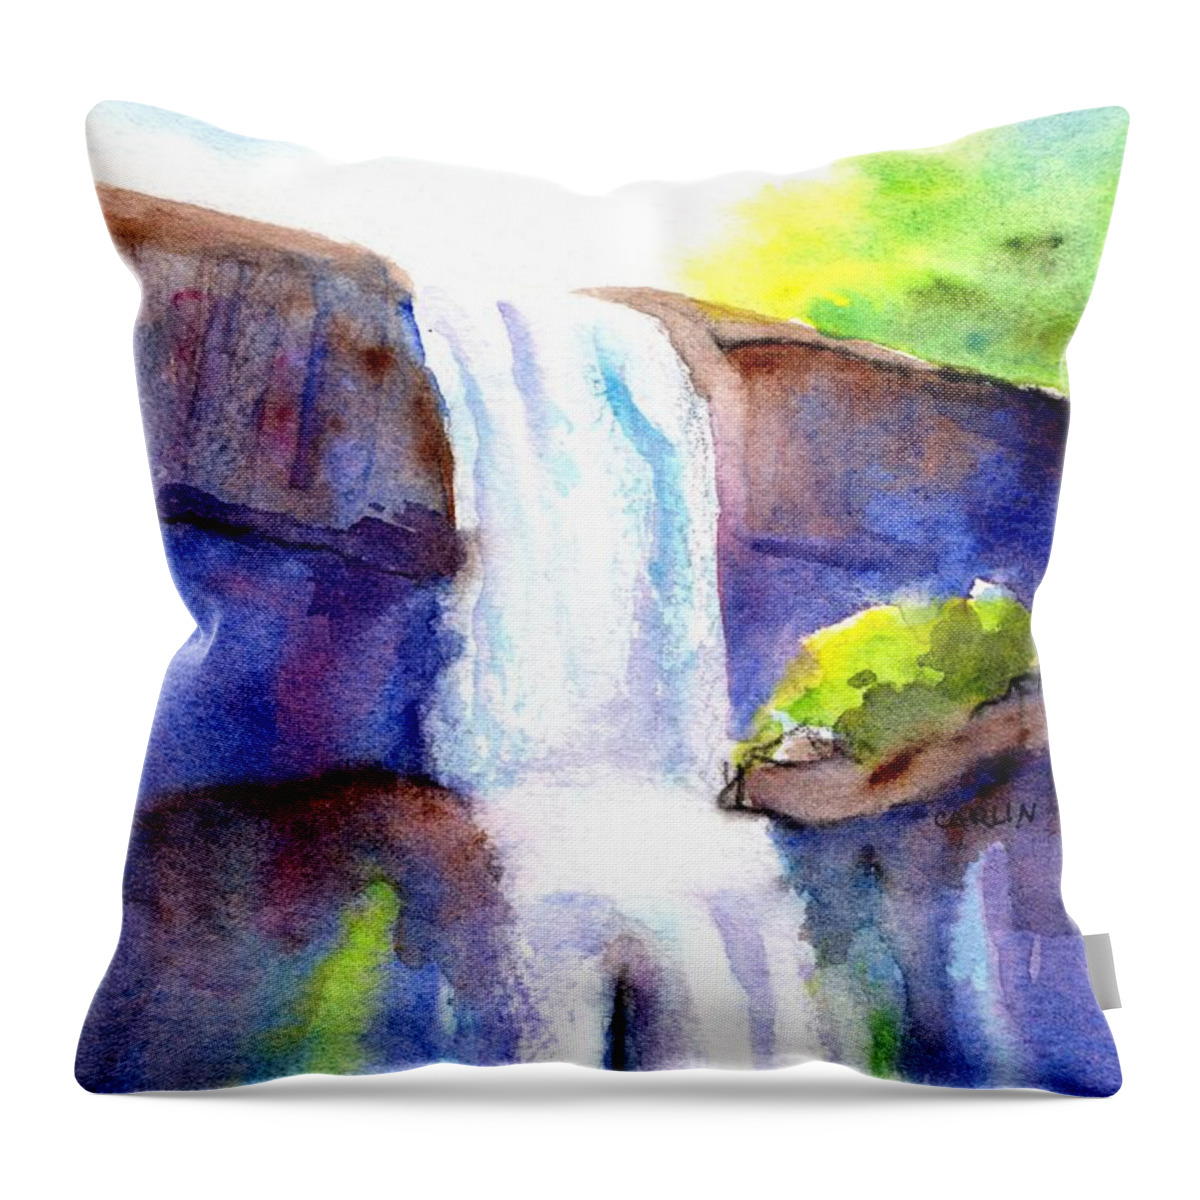 Waterfall Throw Pillow featuring the painting Waterfall Sunny Day by Carlin Blahnik CarlinArtWatercolor